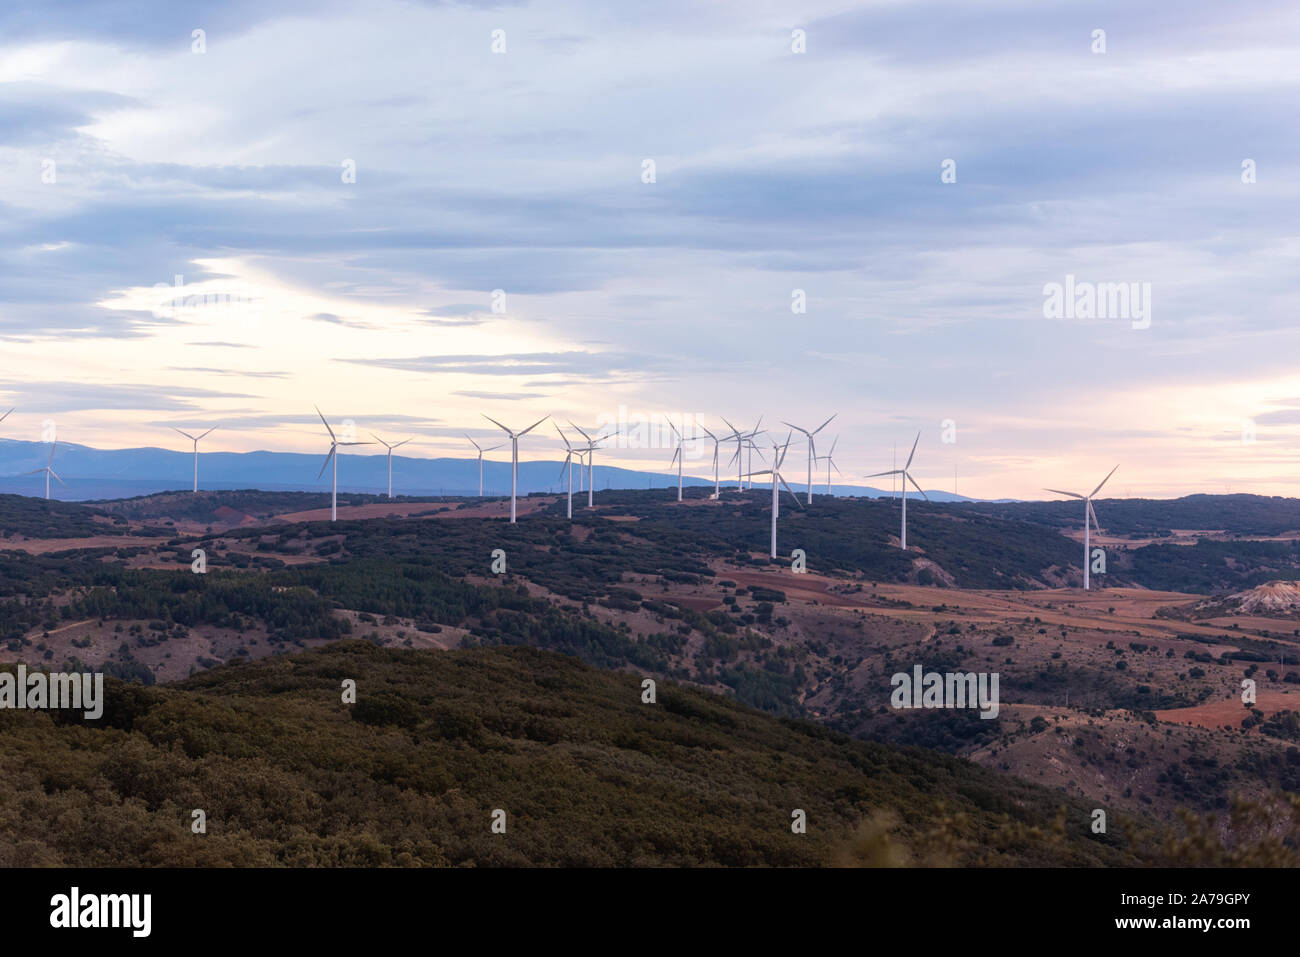 Windmill for electric power production. Landscape with Turbine Green Energy Electricity . Stock Photo